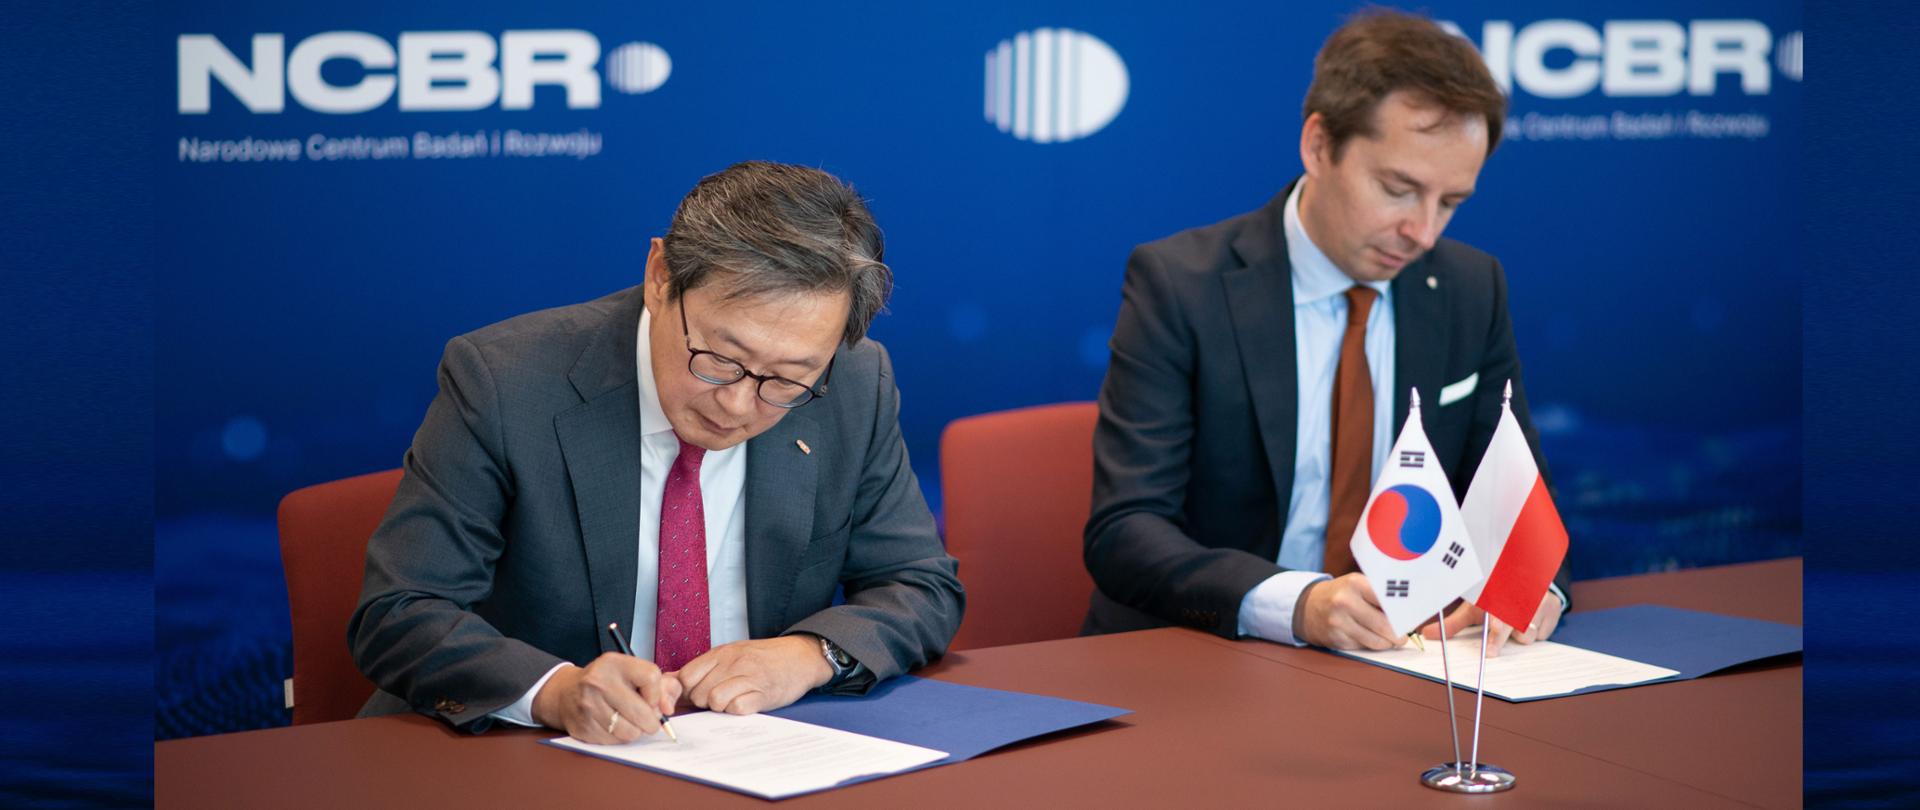 Government institution Korea Institute of Energy Technology Evaluation and Planning and the National Centre for Research and Development (NCBR) have signed an agreement on bilateral cooperation.